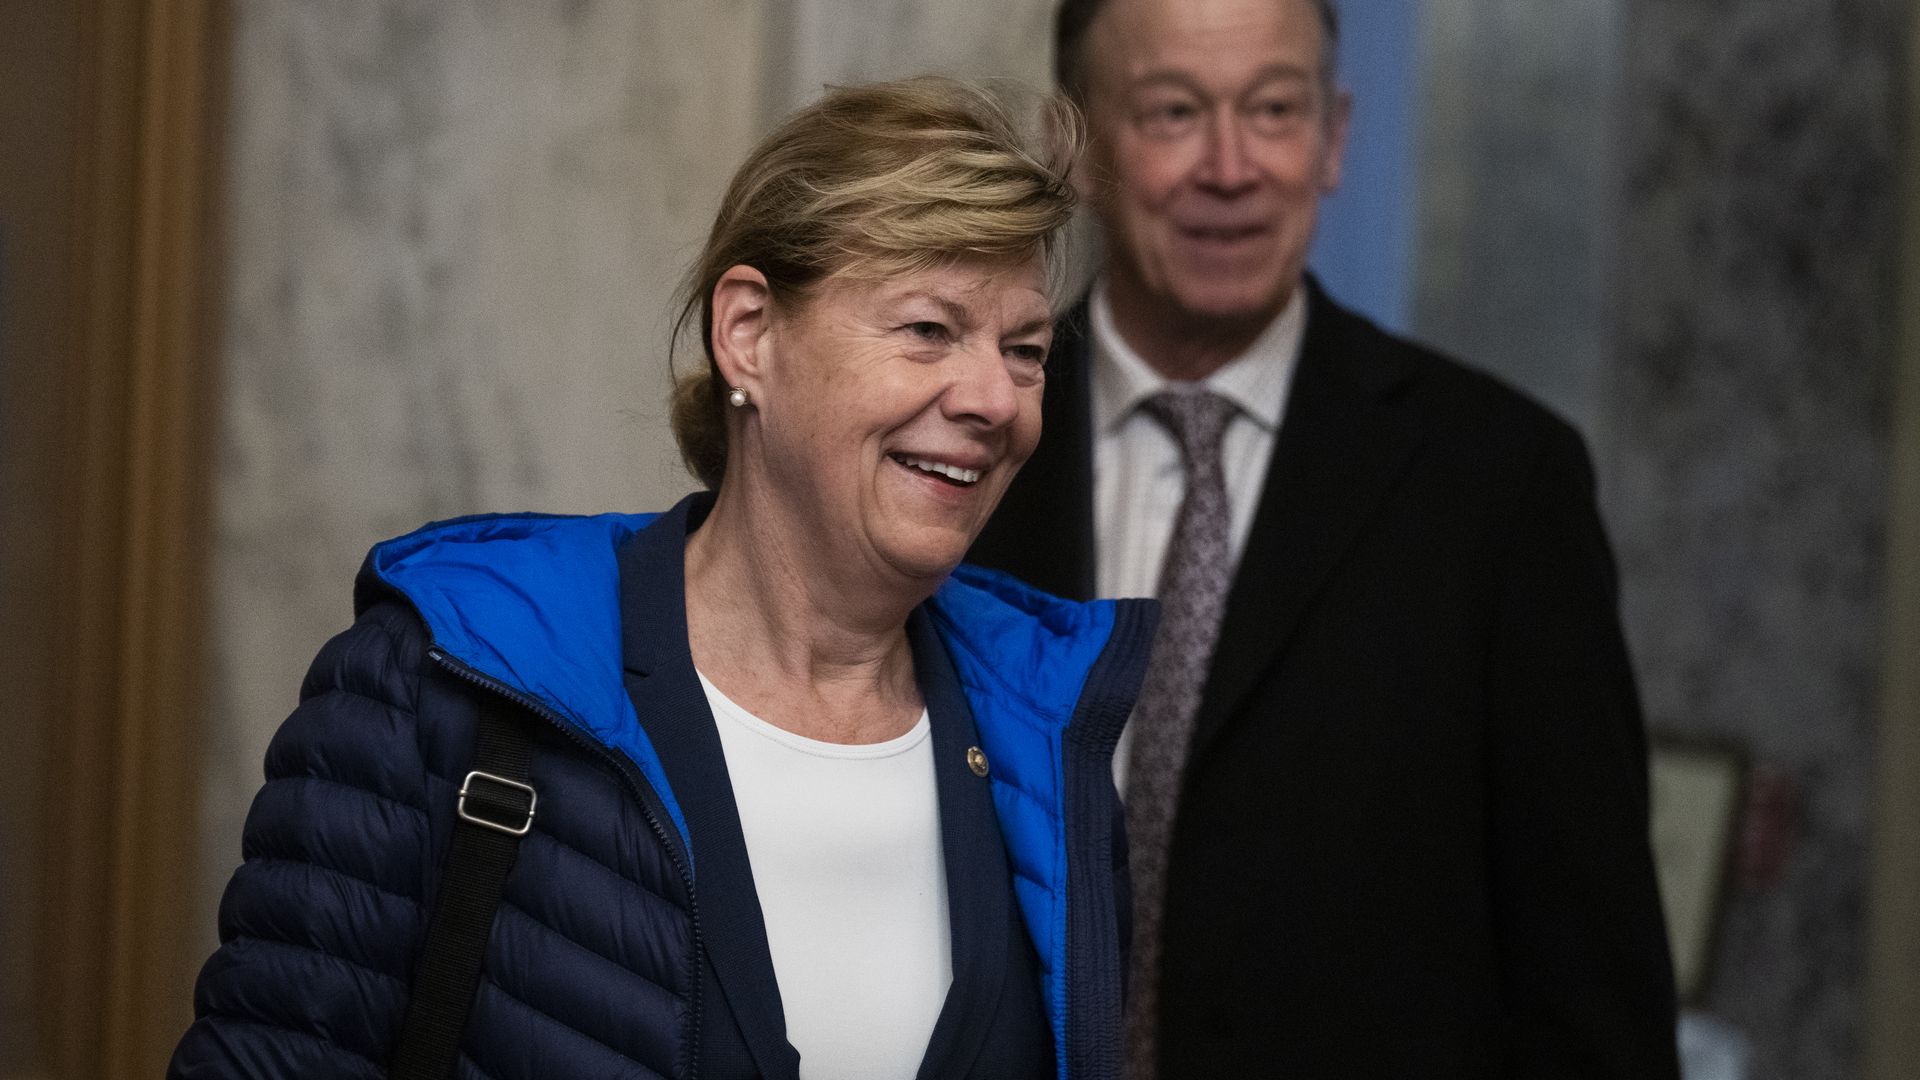 Sen. Tammy Baldwin, wearing a black puffy jacket with a blue lining over a dark blue blazer and white shirt, walks into the capitol in front of Sen. John Hickenlooper.